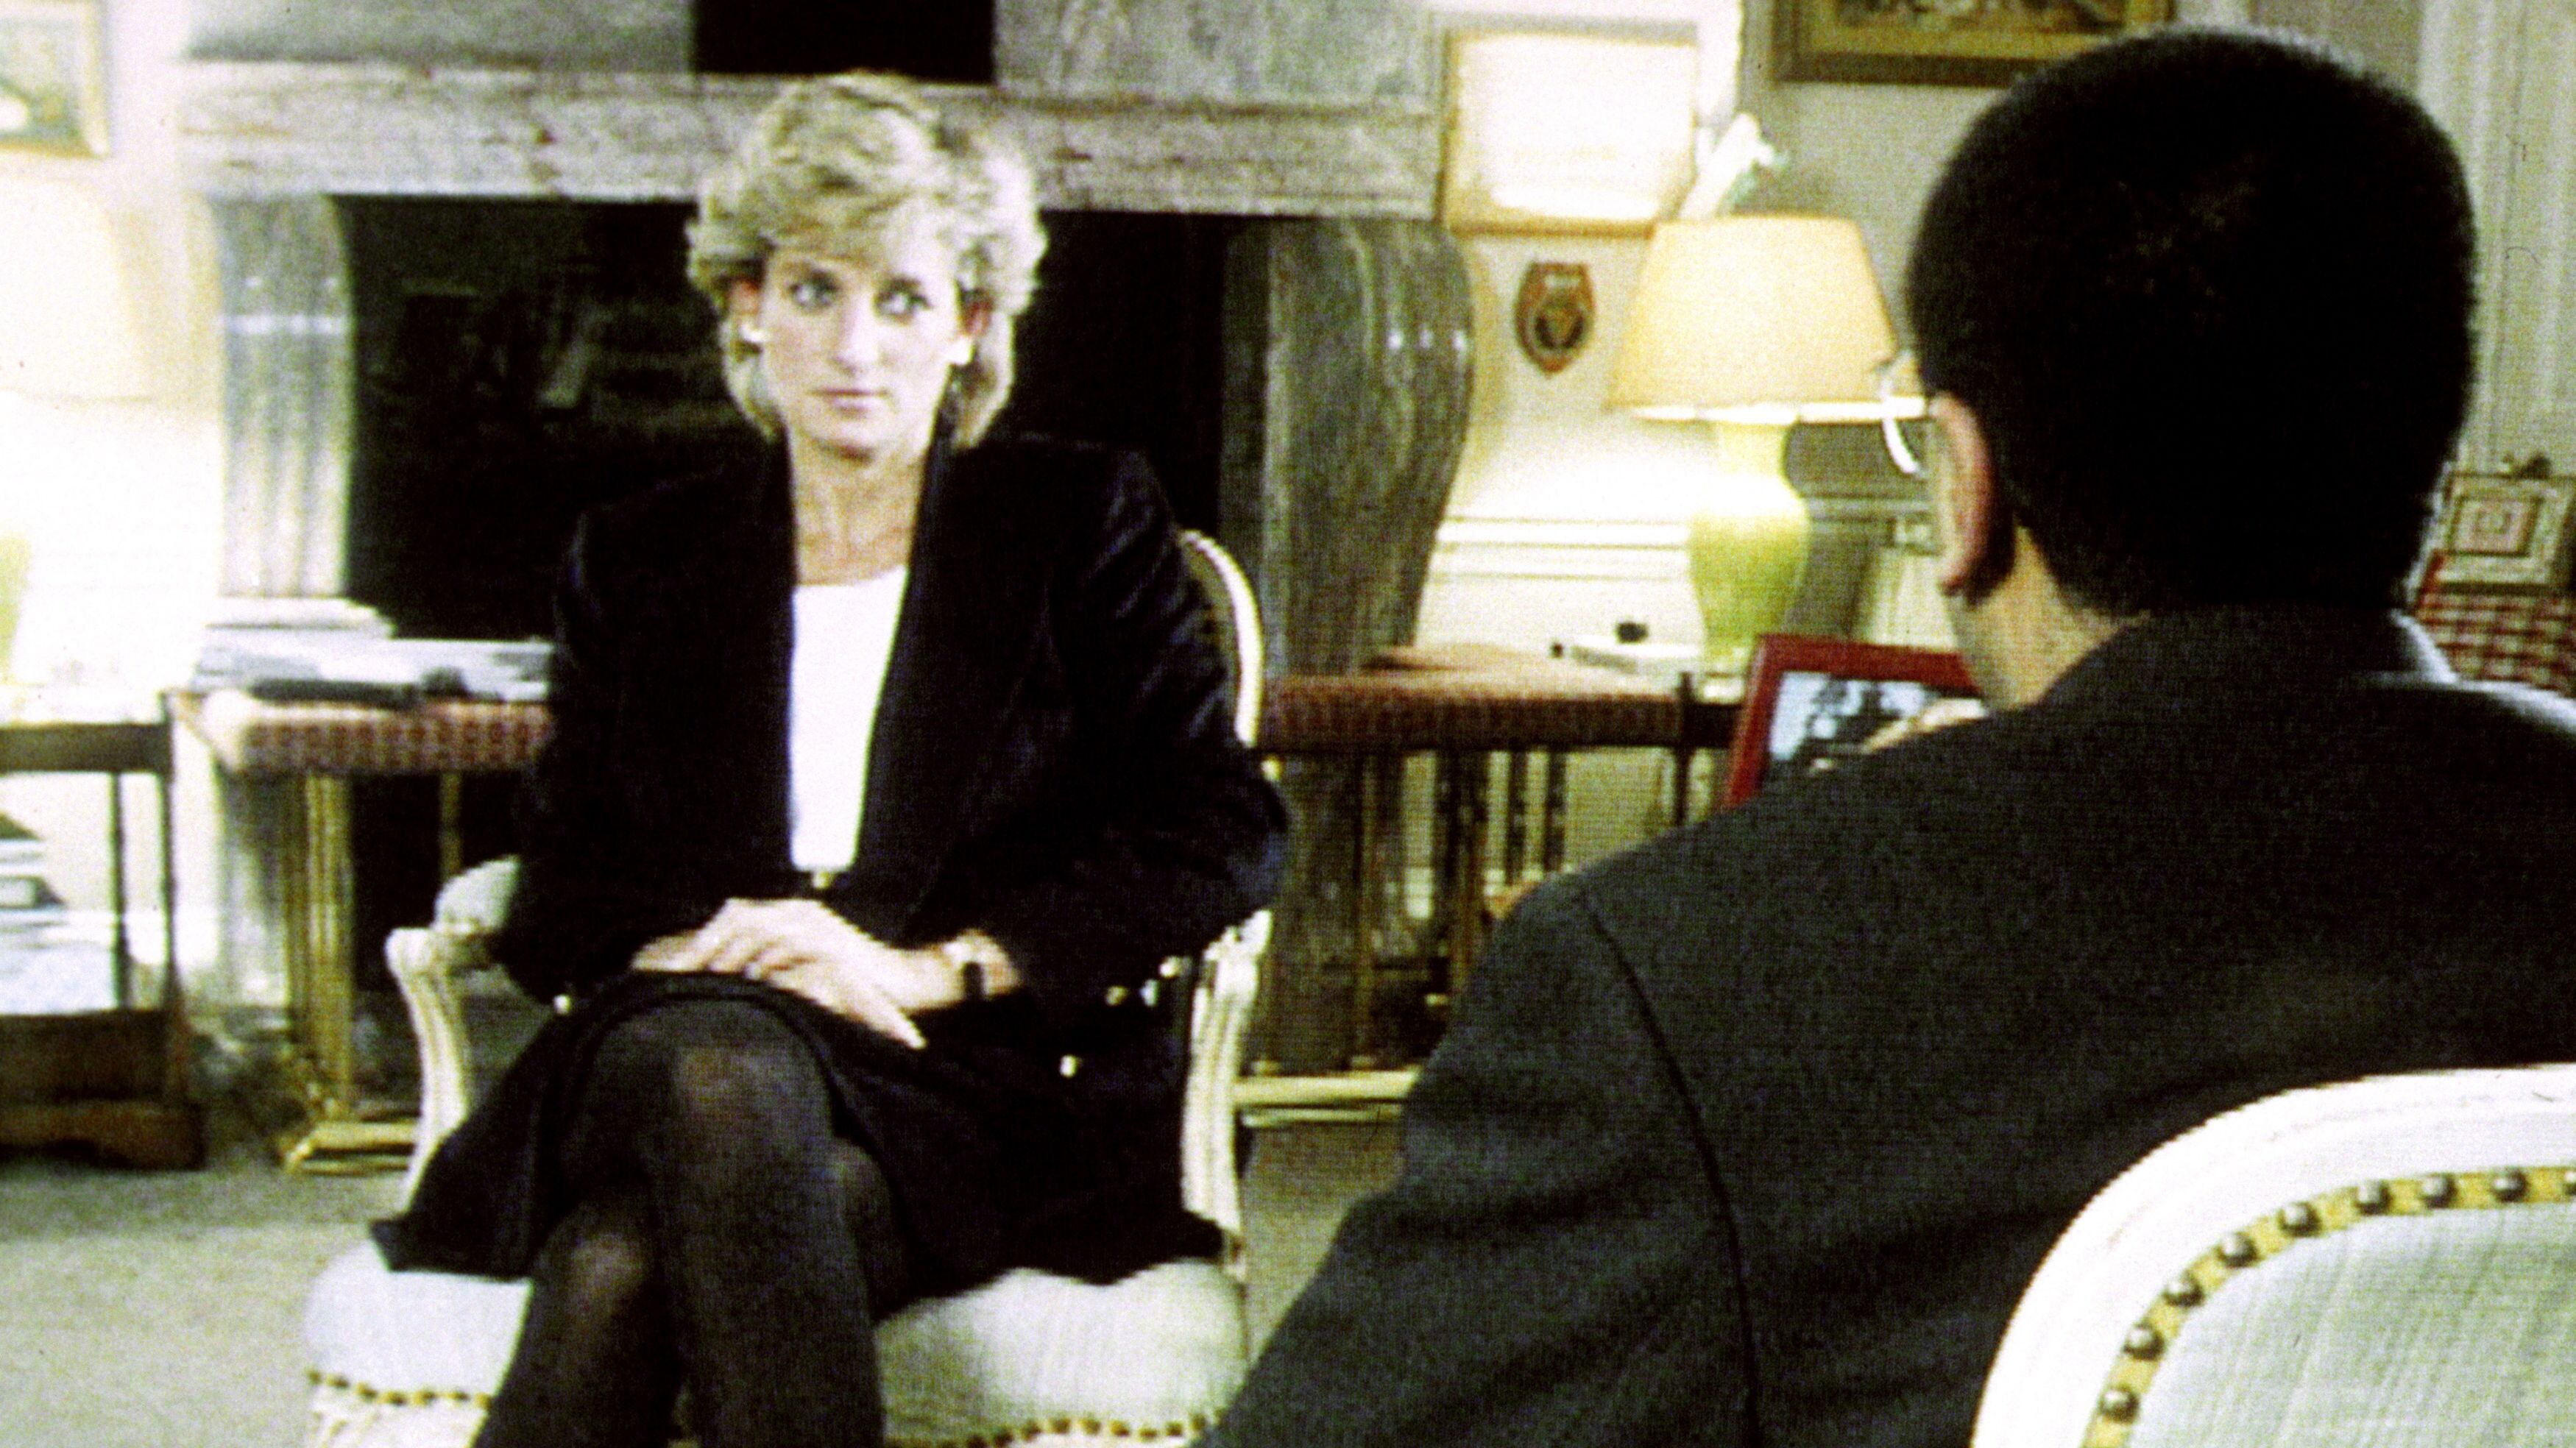 Diana, Princess of Wales was interviewed by Martin Bashir for the BBC in 1995